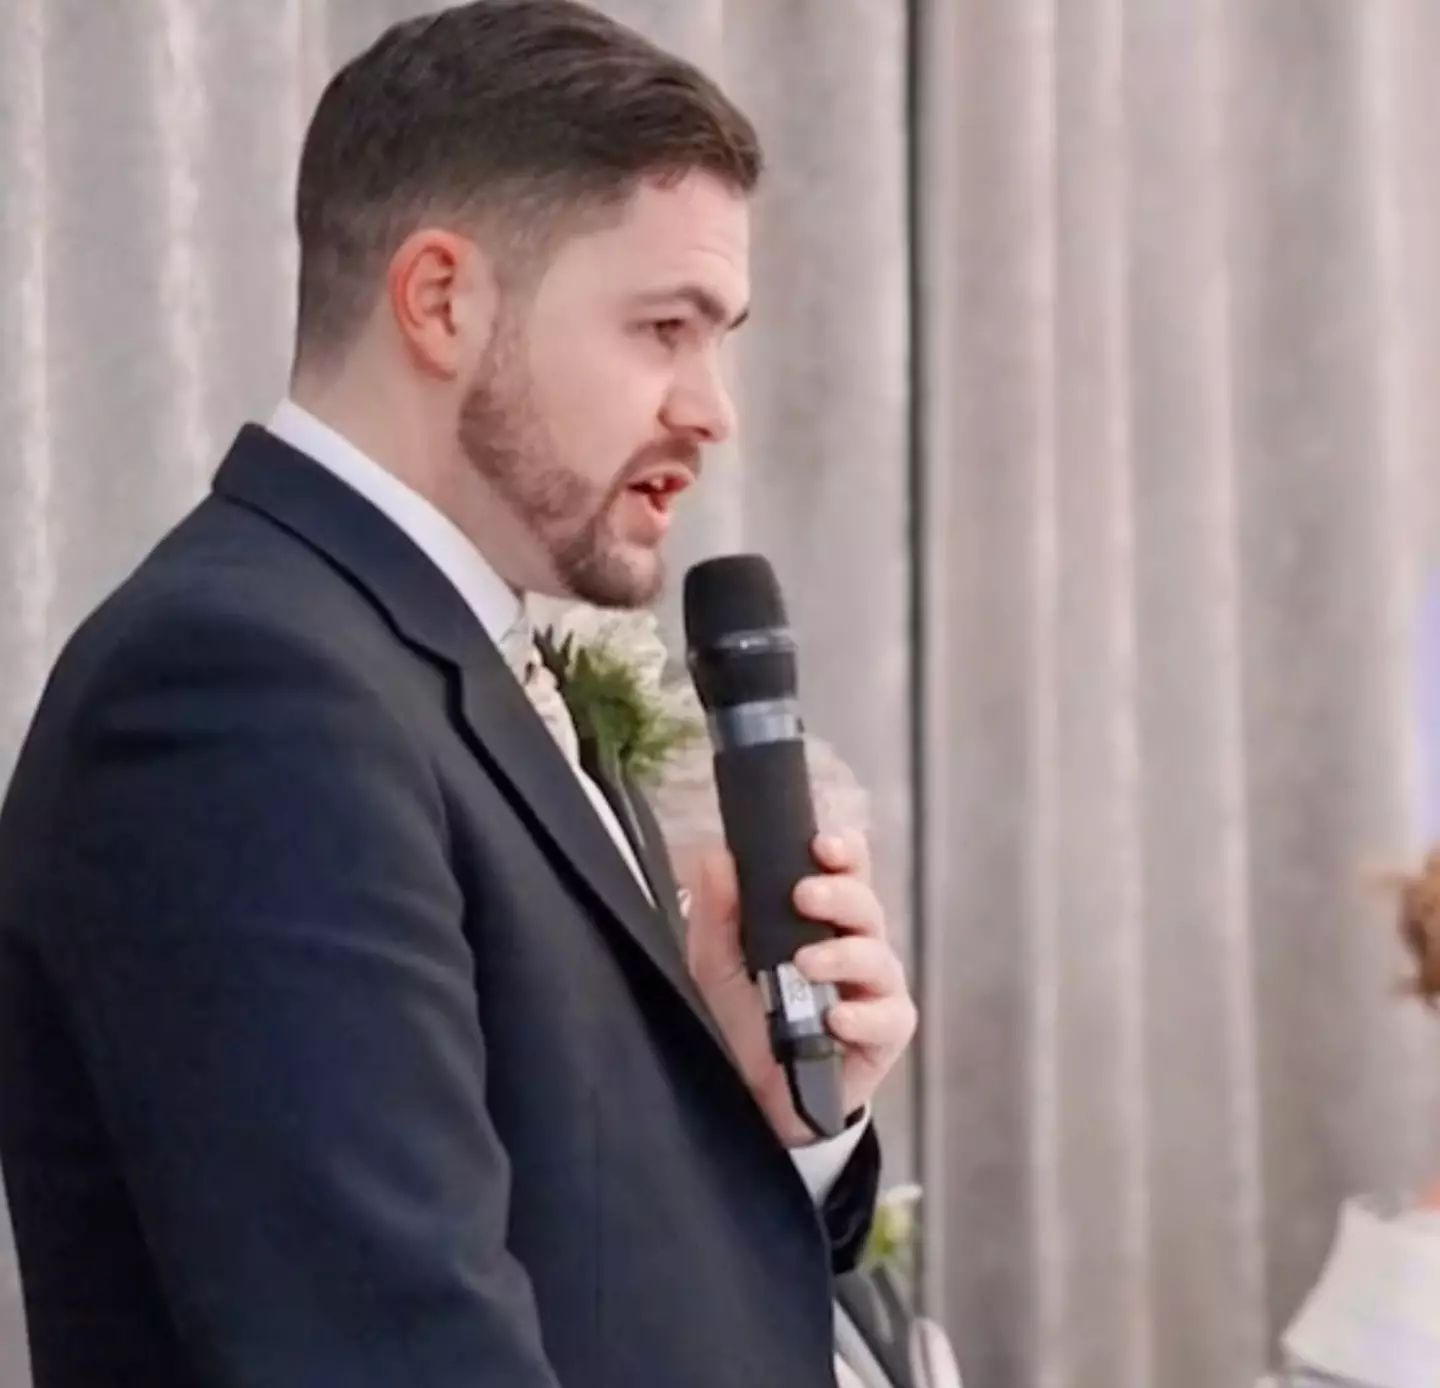 Neil stepped up to give his best man speech.